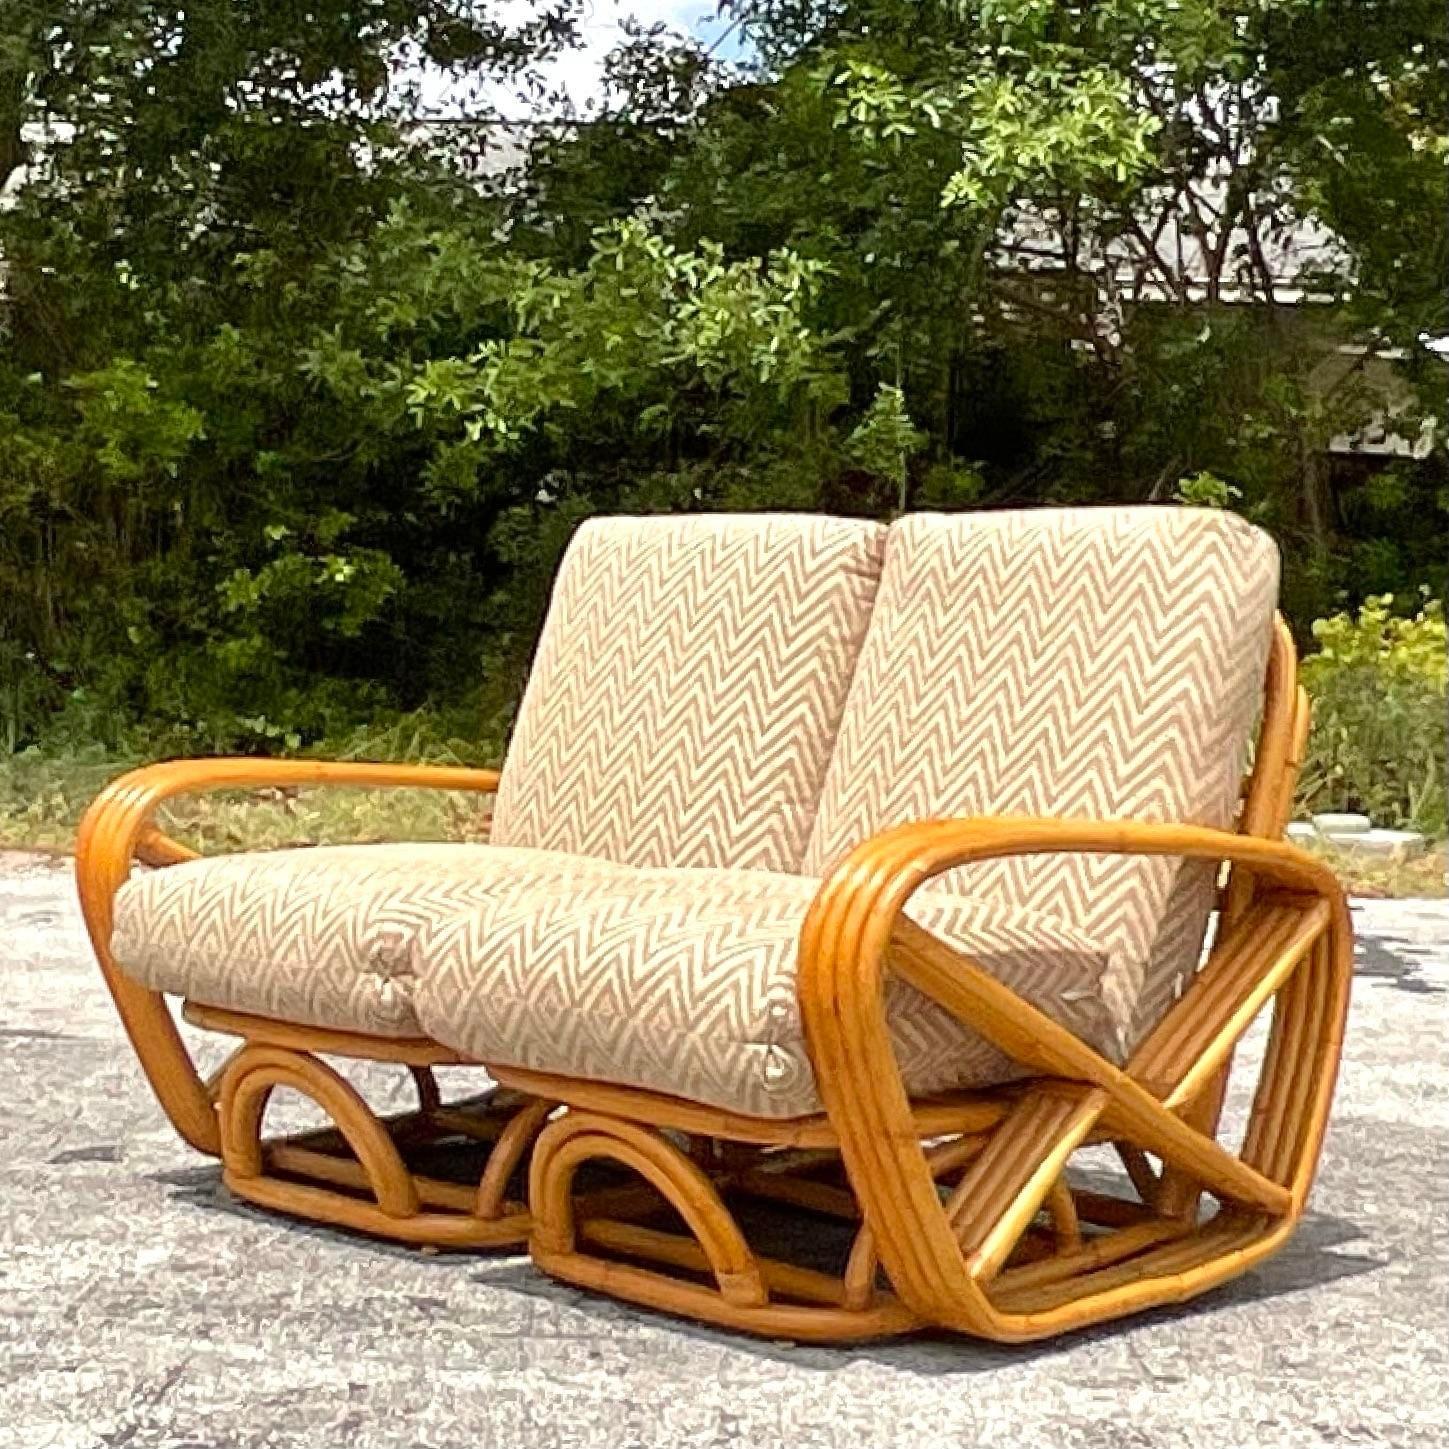 Embrace coastal sophistication with this Vintage Four Strand Bent Rattan Sofa, reminiscent of iconic designs by Frankl. Crafted with American flair, its elegant four-strand construction and natural rattan weave offer a timeless blend of comfort and